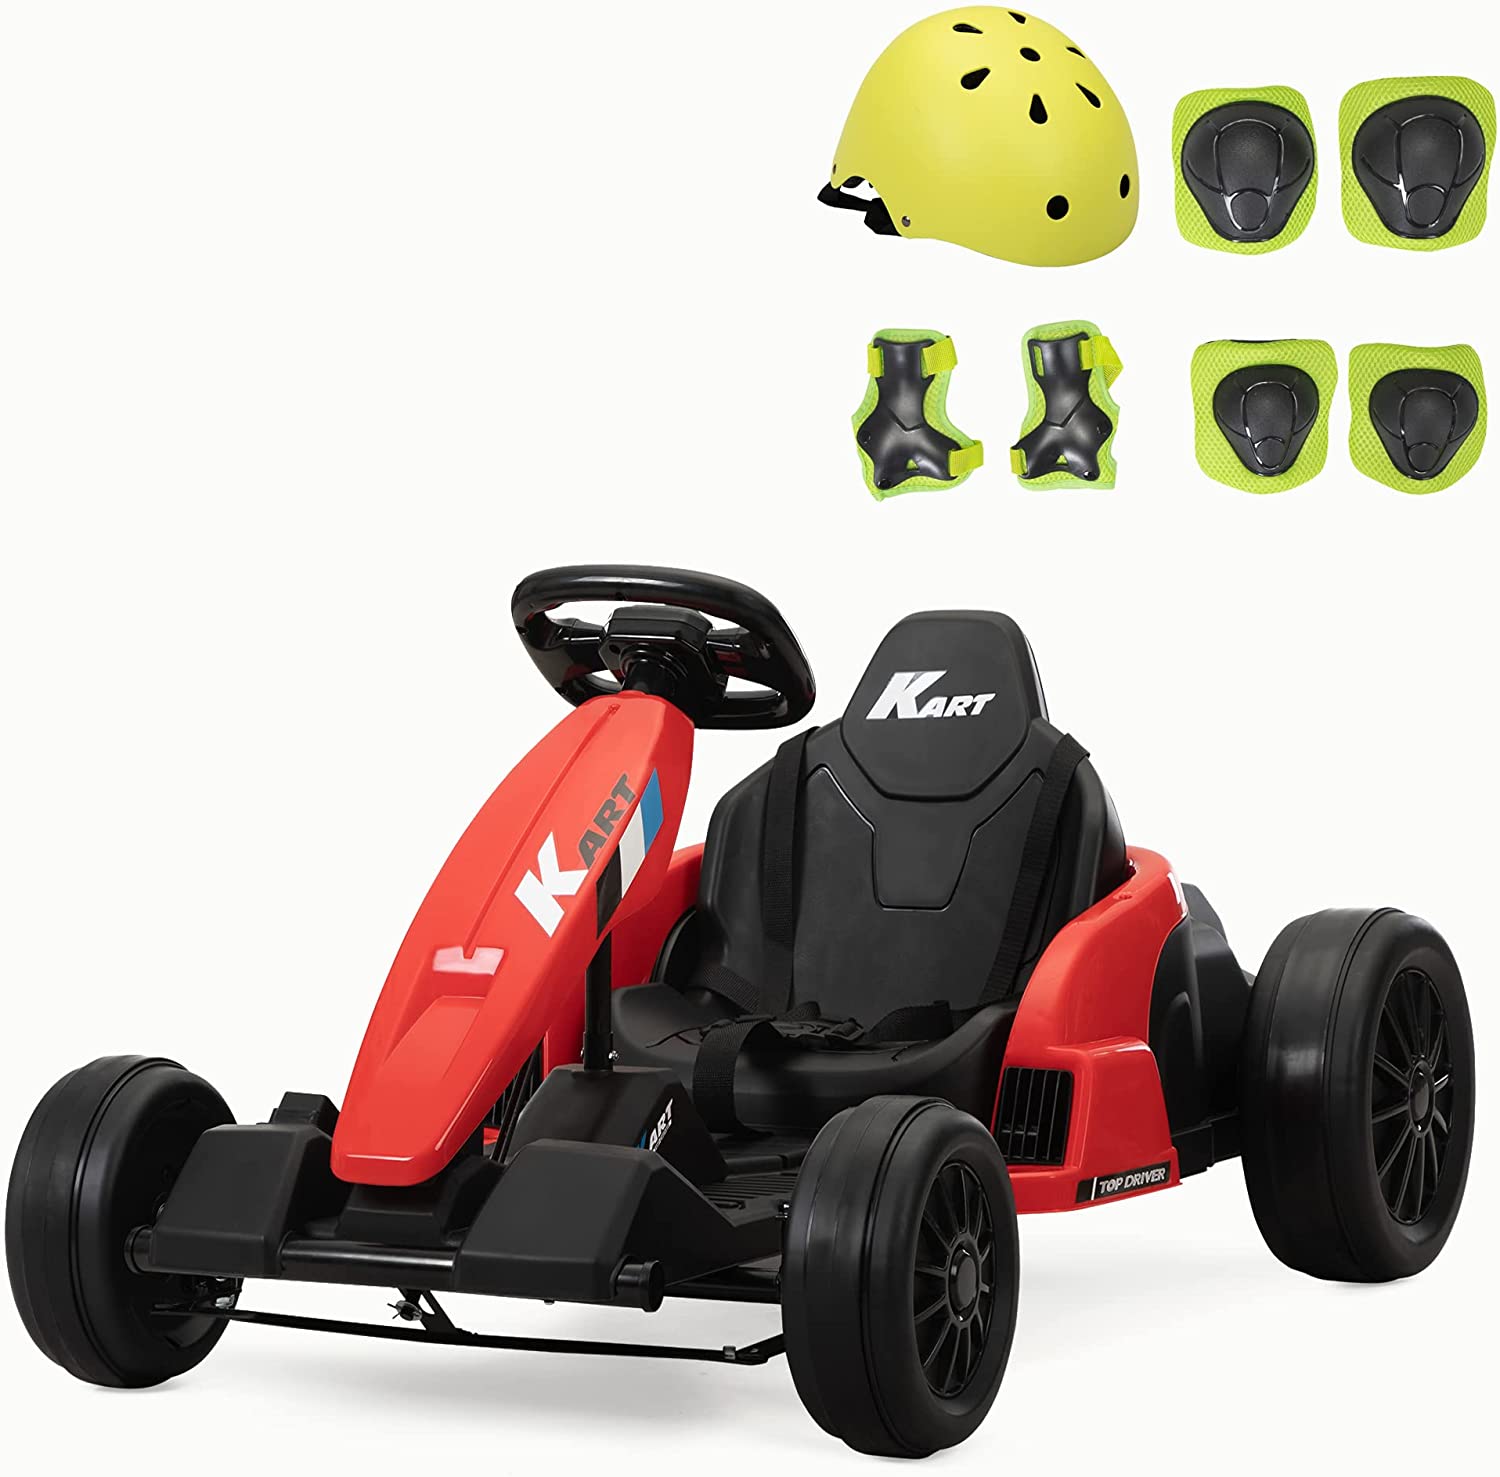 Tobbi 24V Electric Kids Go Kart, Battery Powered Drift Racing Ride On Toy Car with Protective Suits, Horn, MP3, Red+Black 71FjGDM GeL. AC SL1500